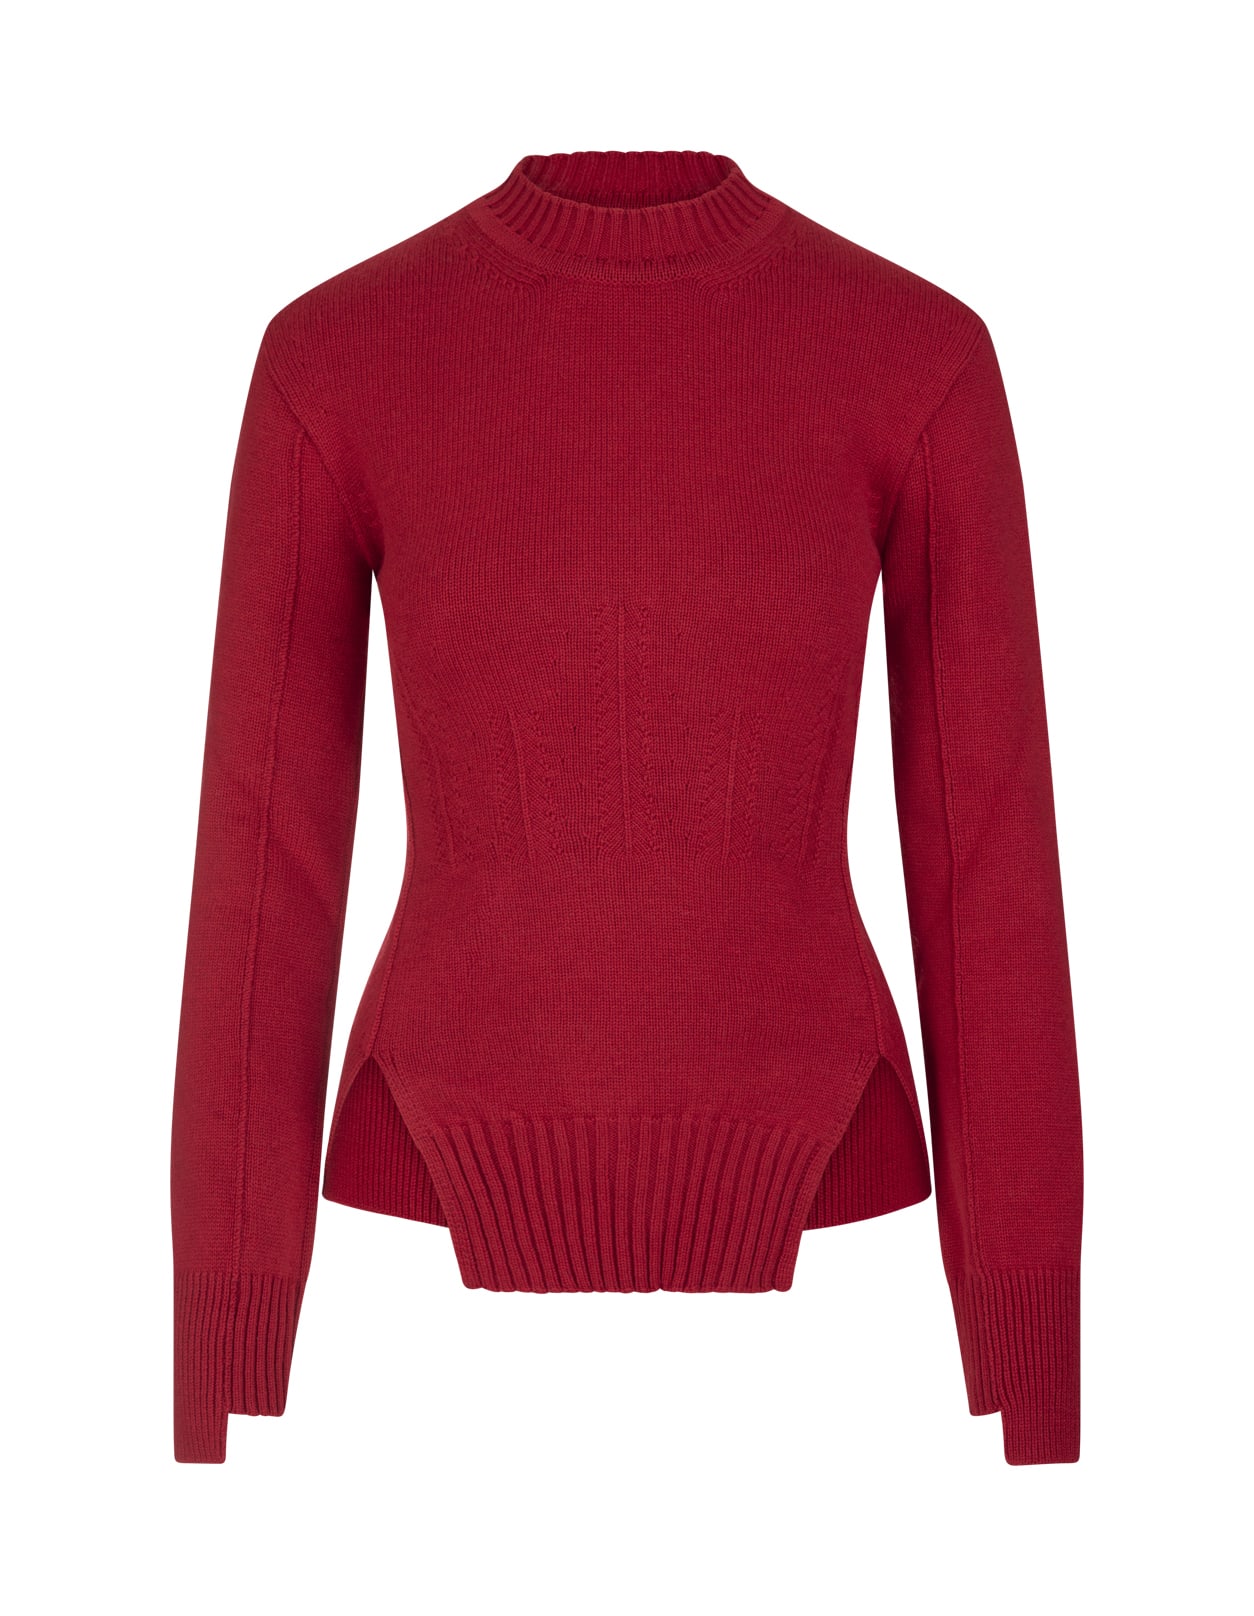 Alexander McQueen Woman Red Cashmere Sweater With Corset Stitching